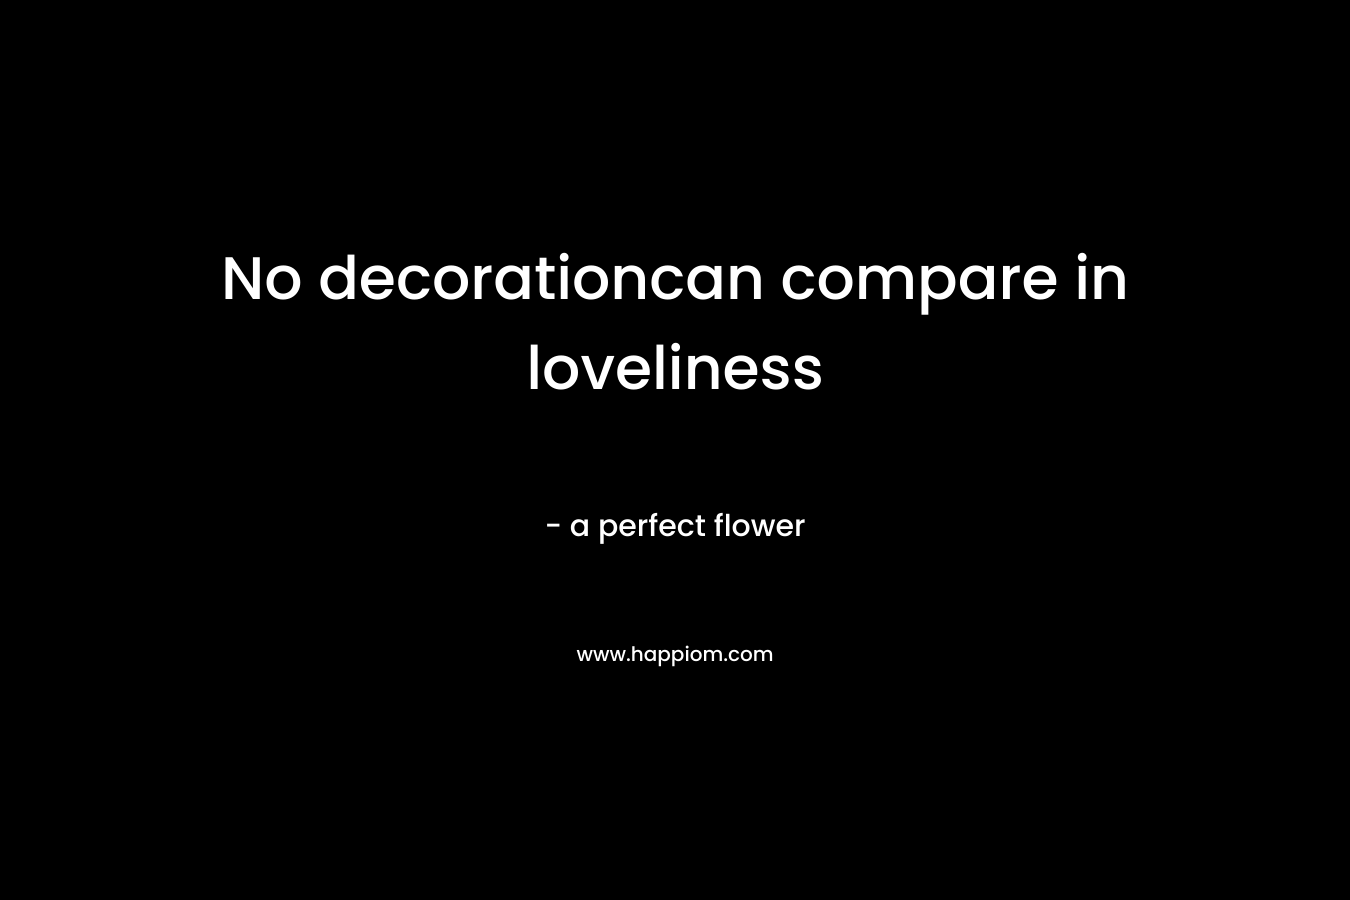 No decorationcan compare in loveliness